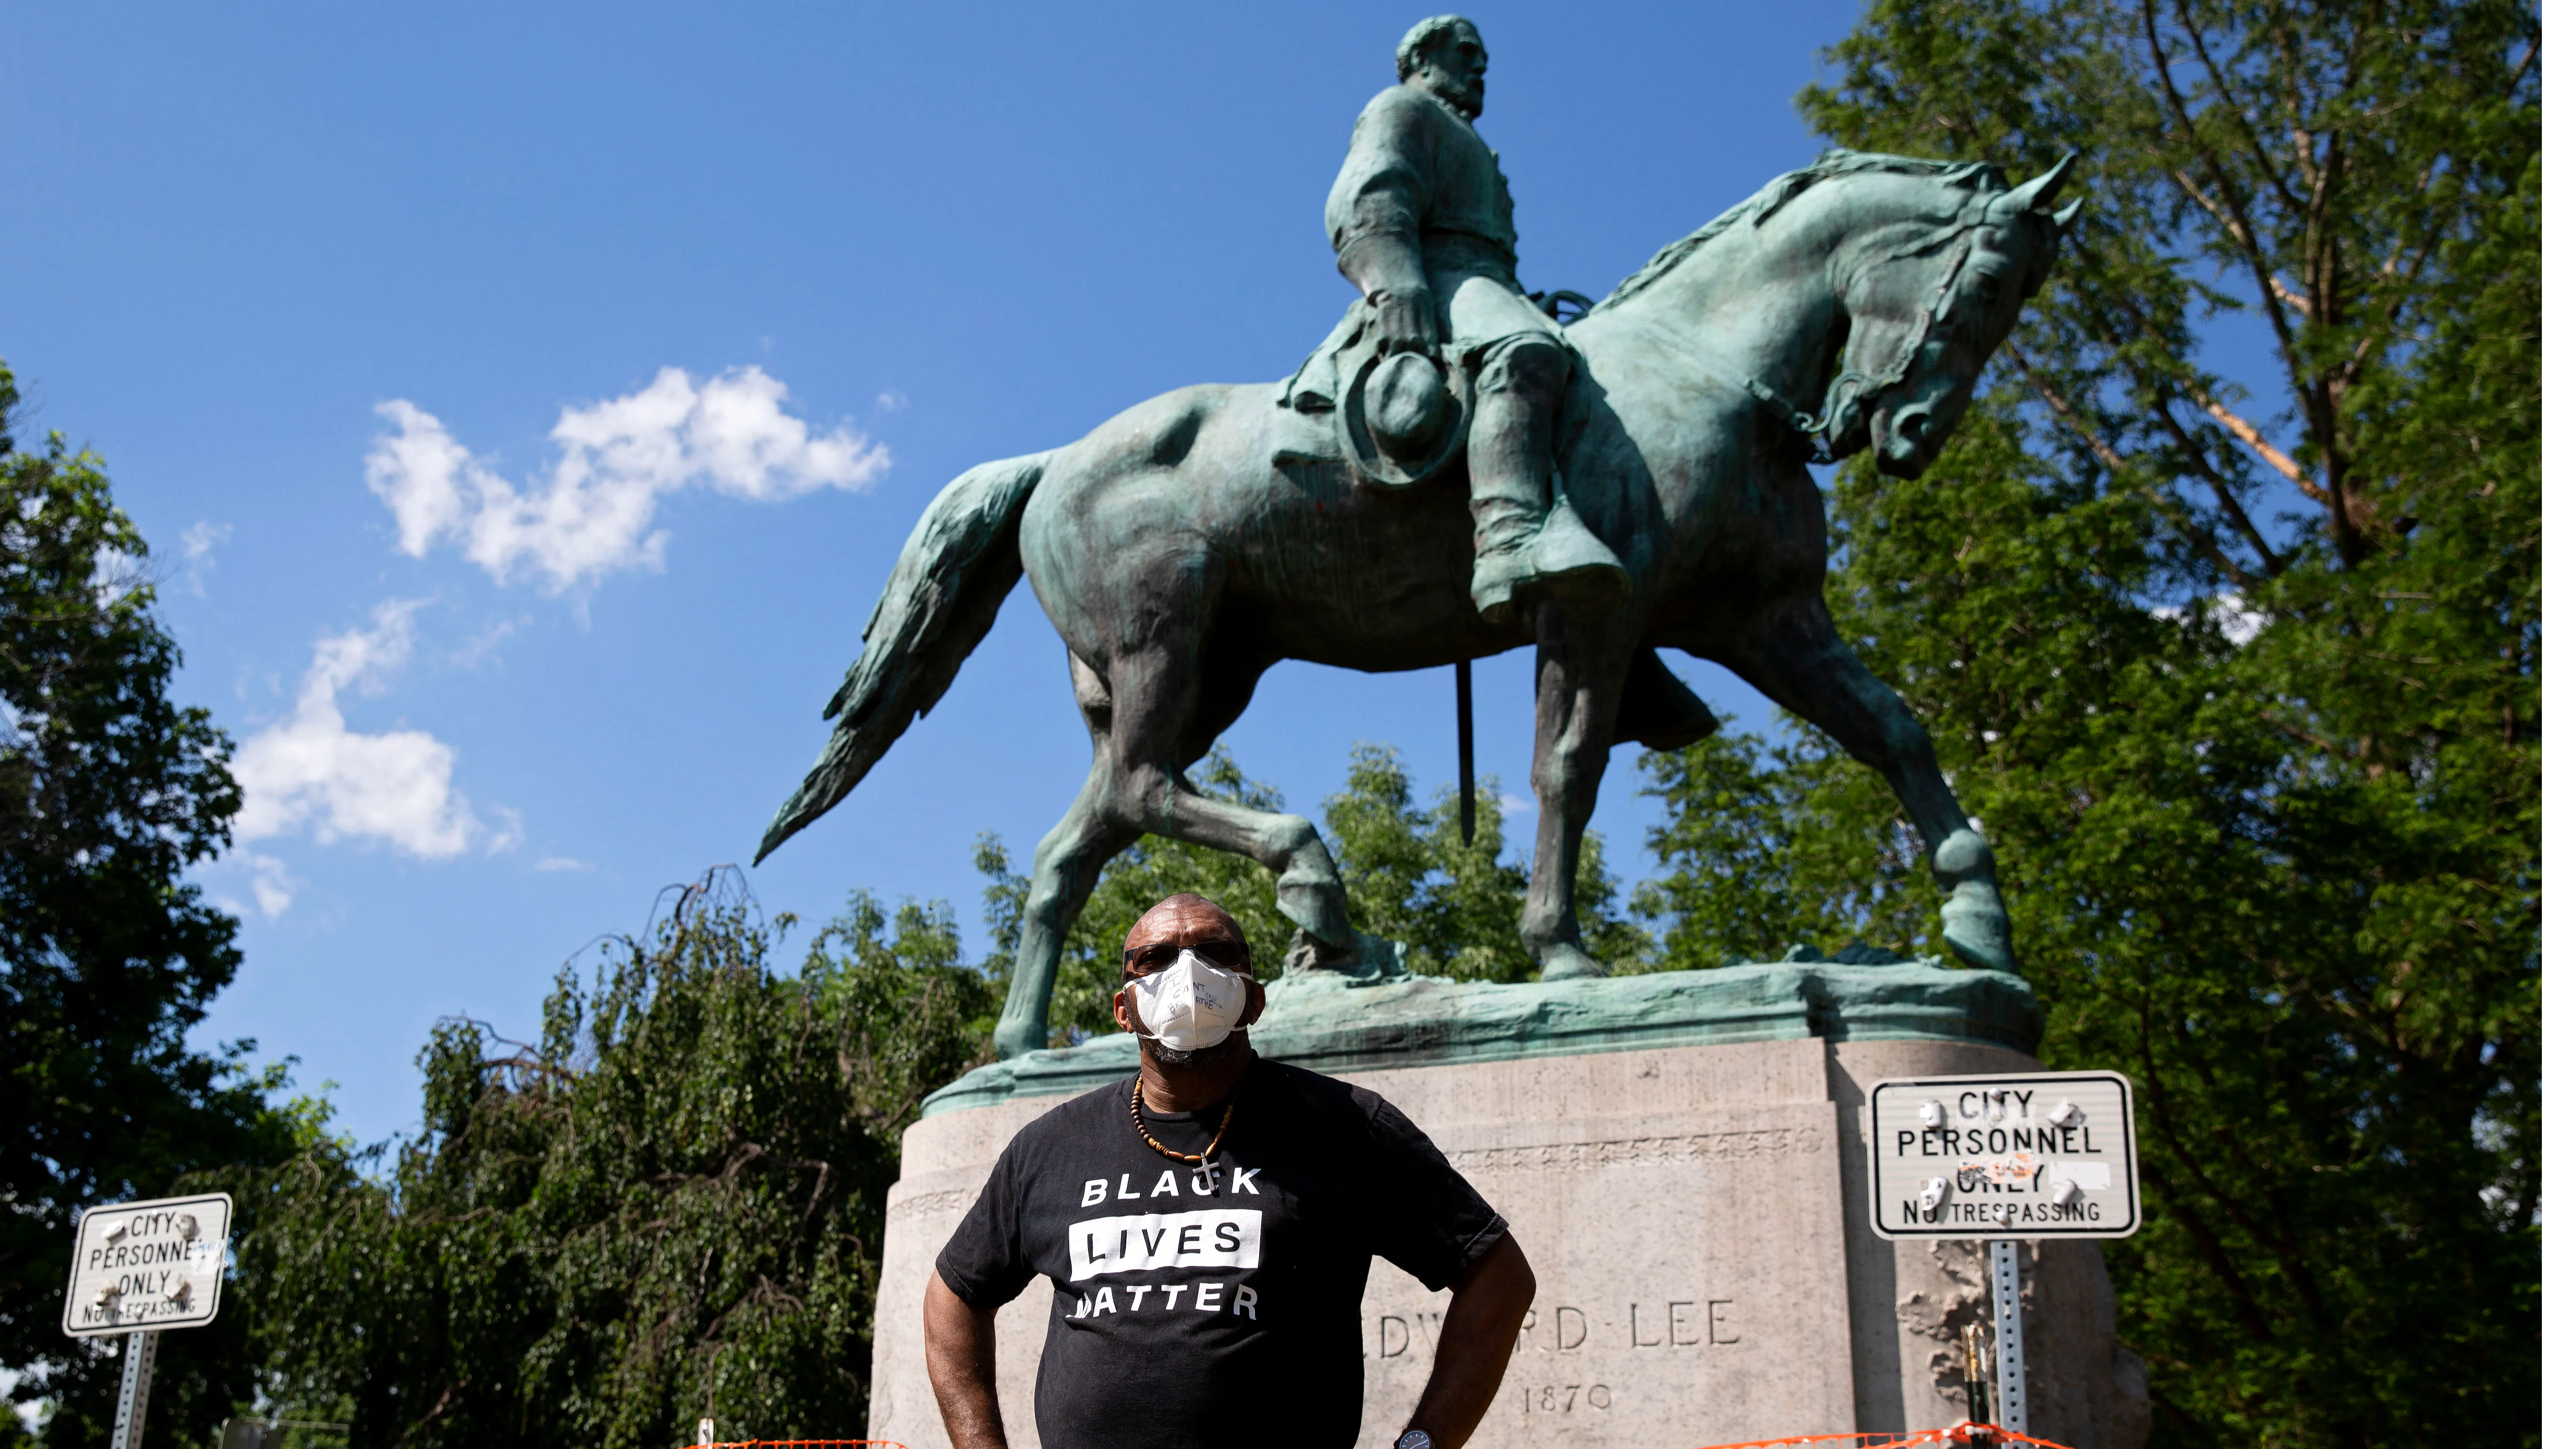 Virginia city takes down statues that sparked violent protests